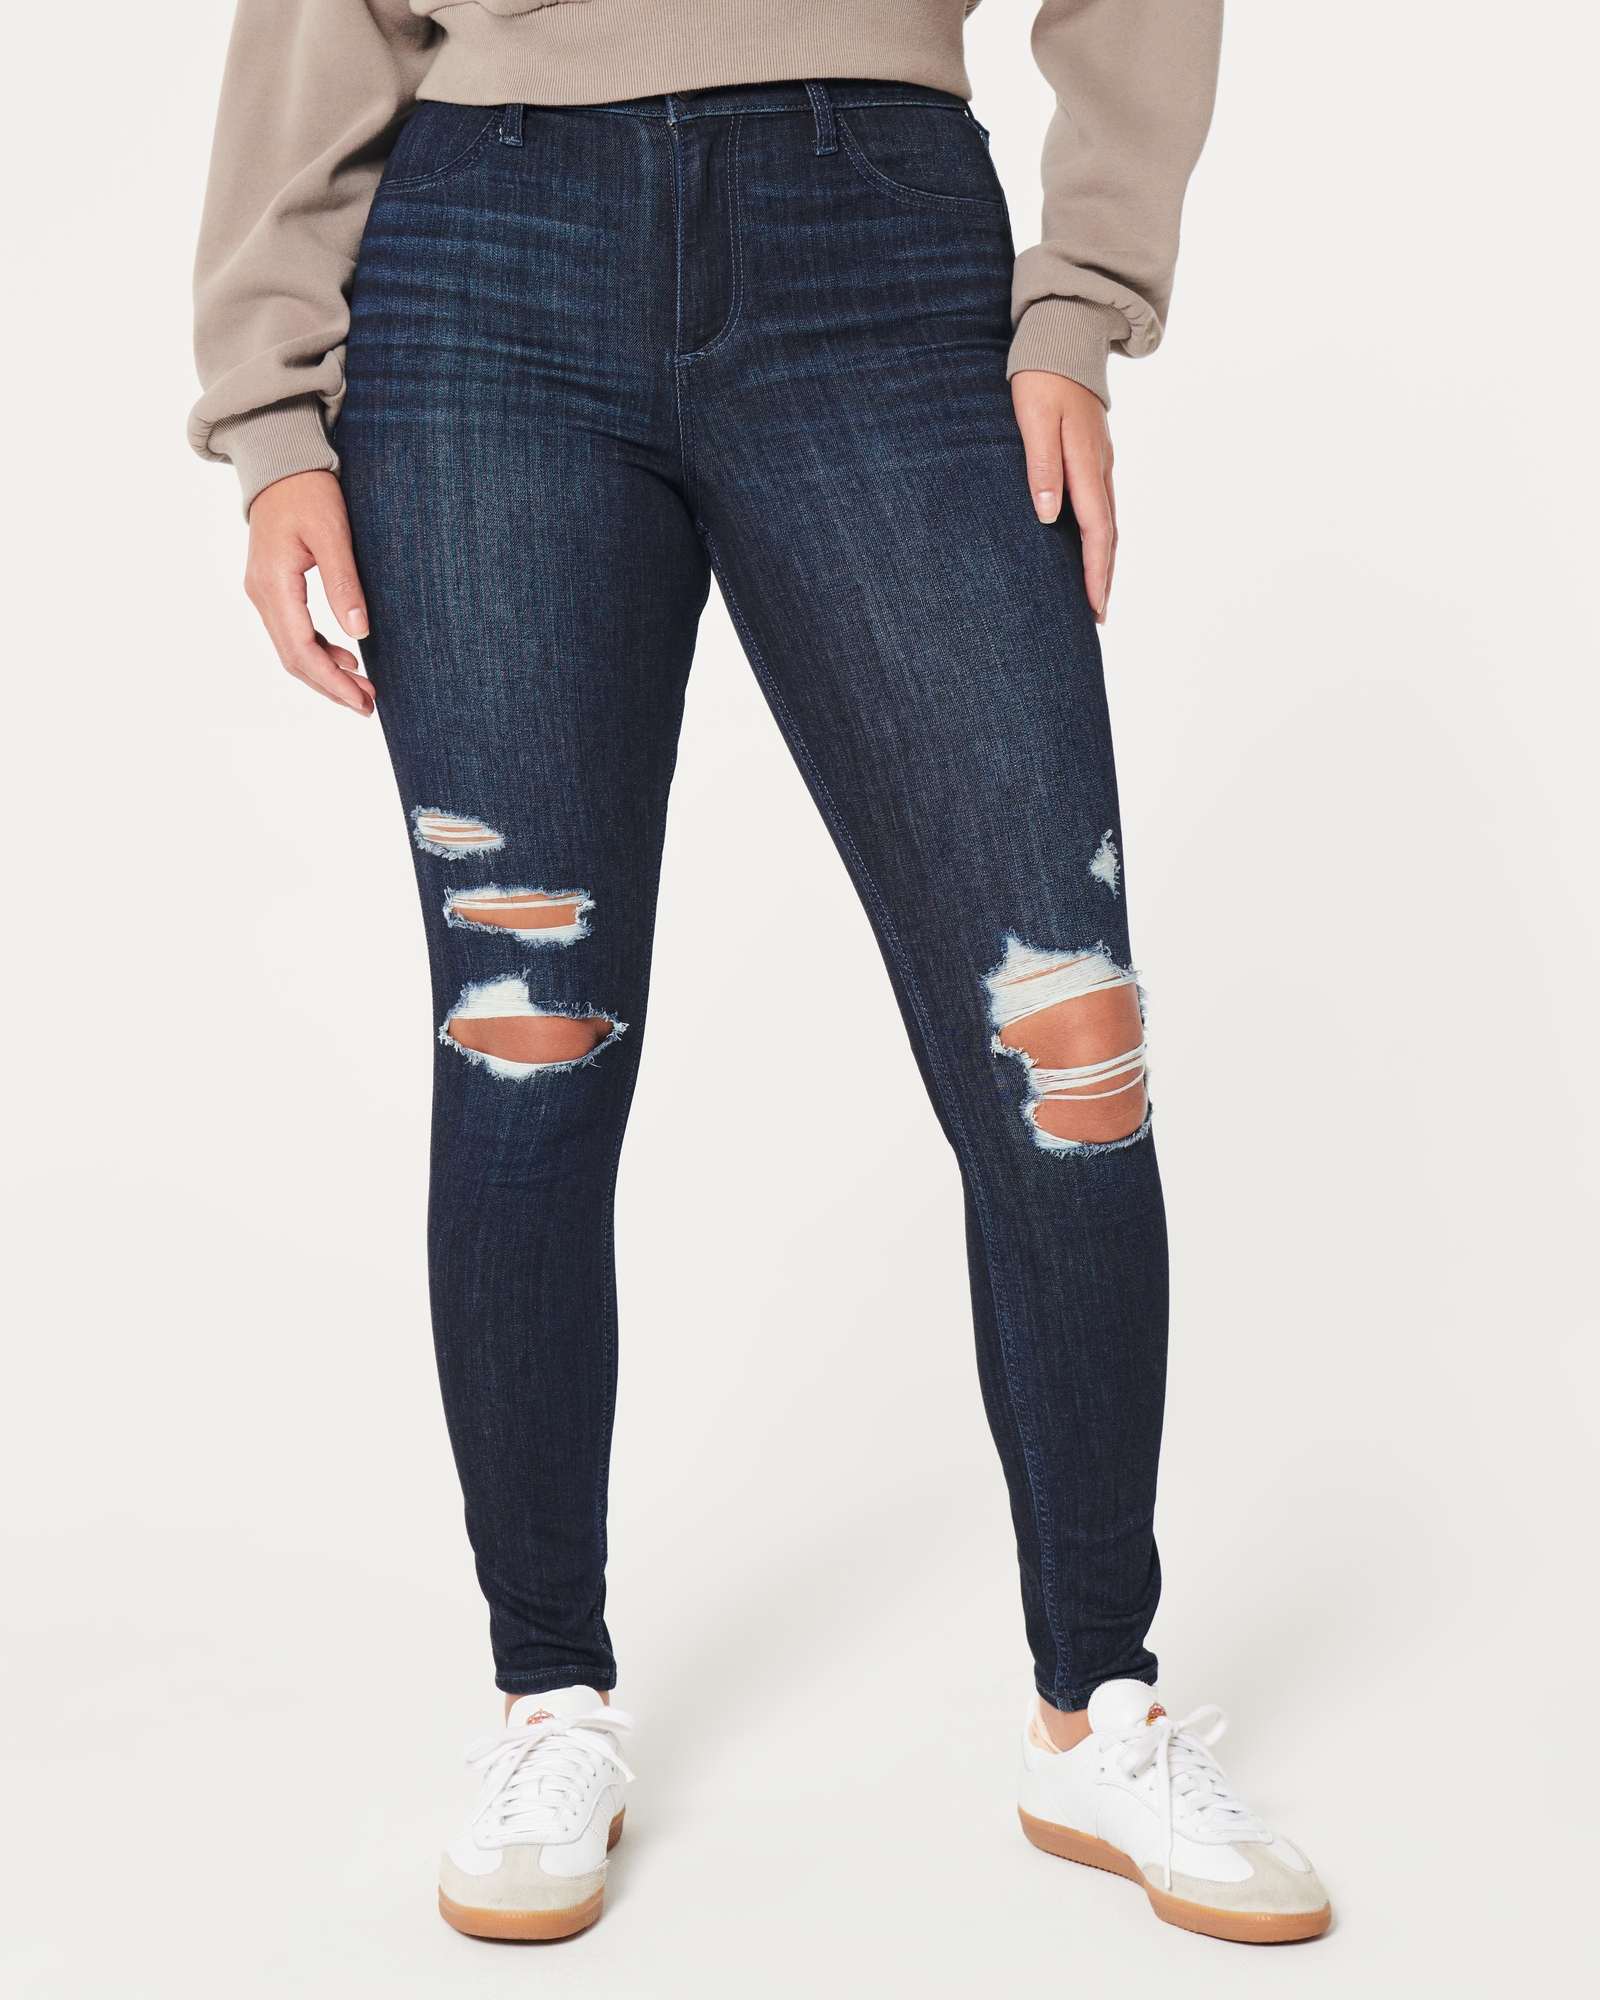 Stylish and Comfy Hollister Ultra High-Rise Jean Leggings